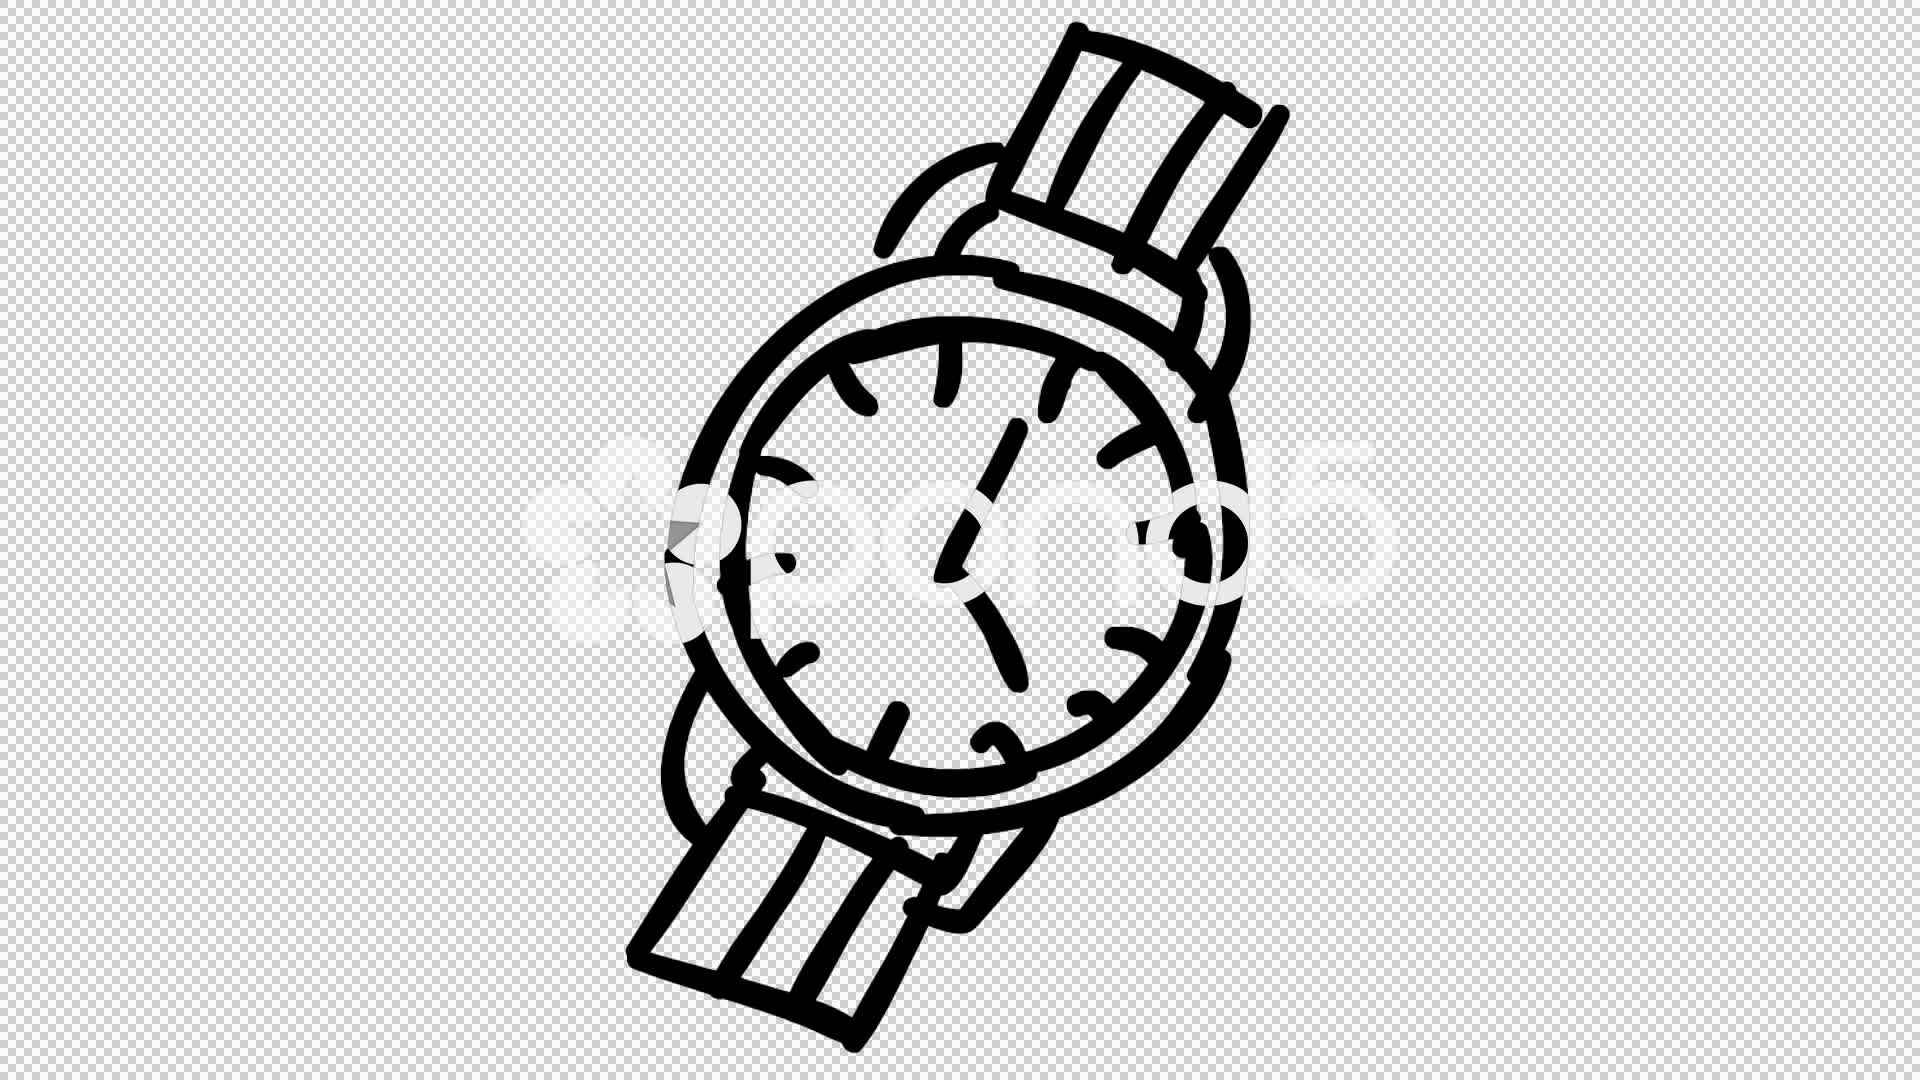 wrist watch clipart black and white